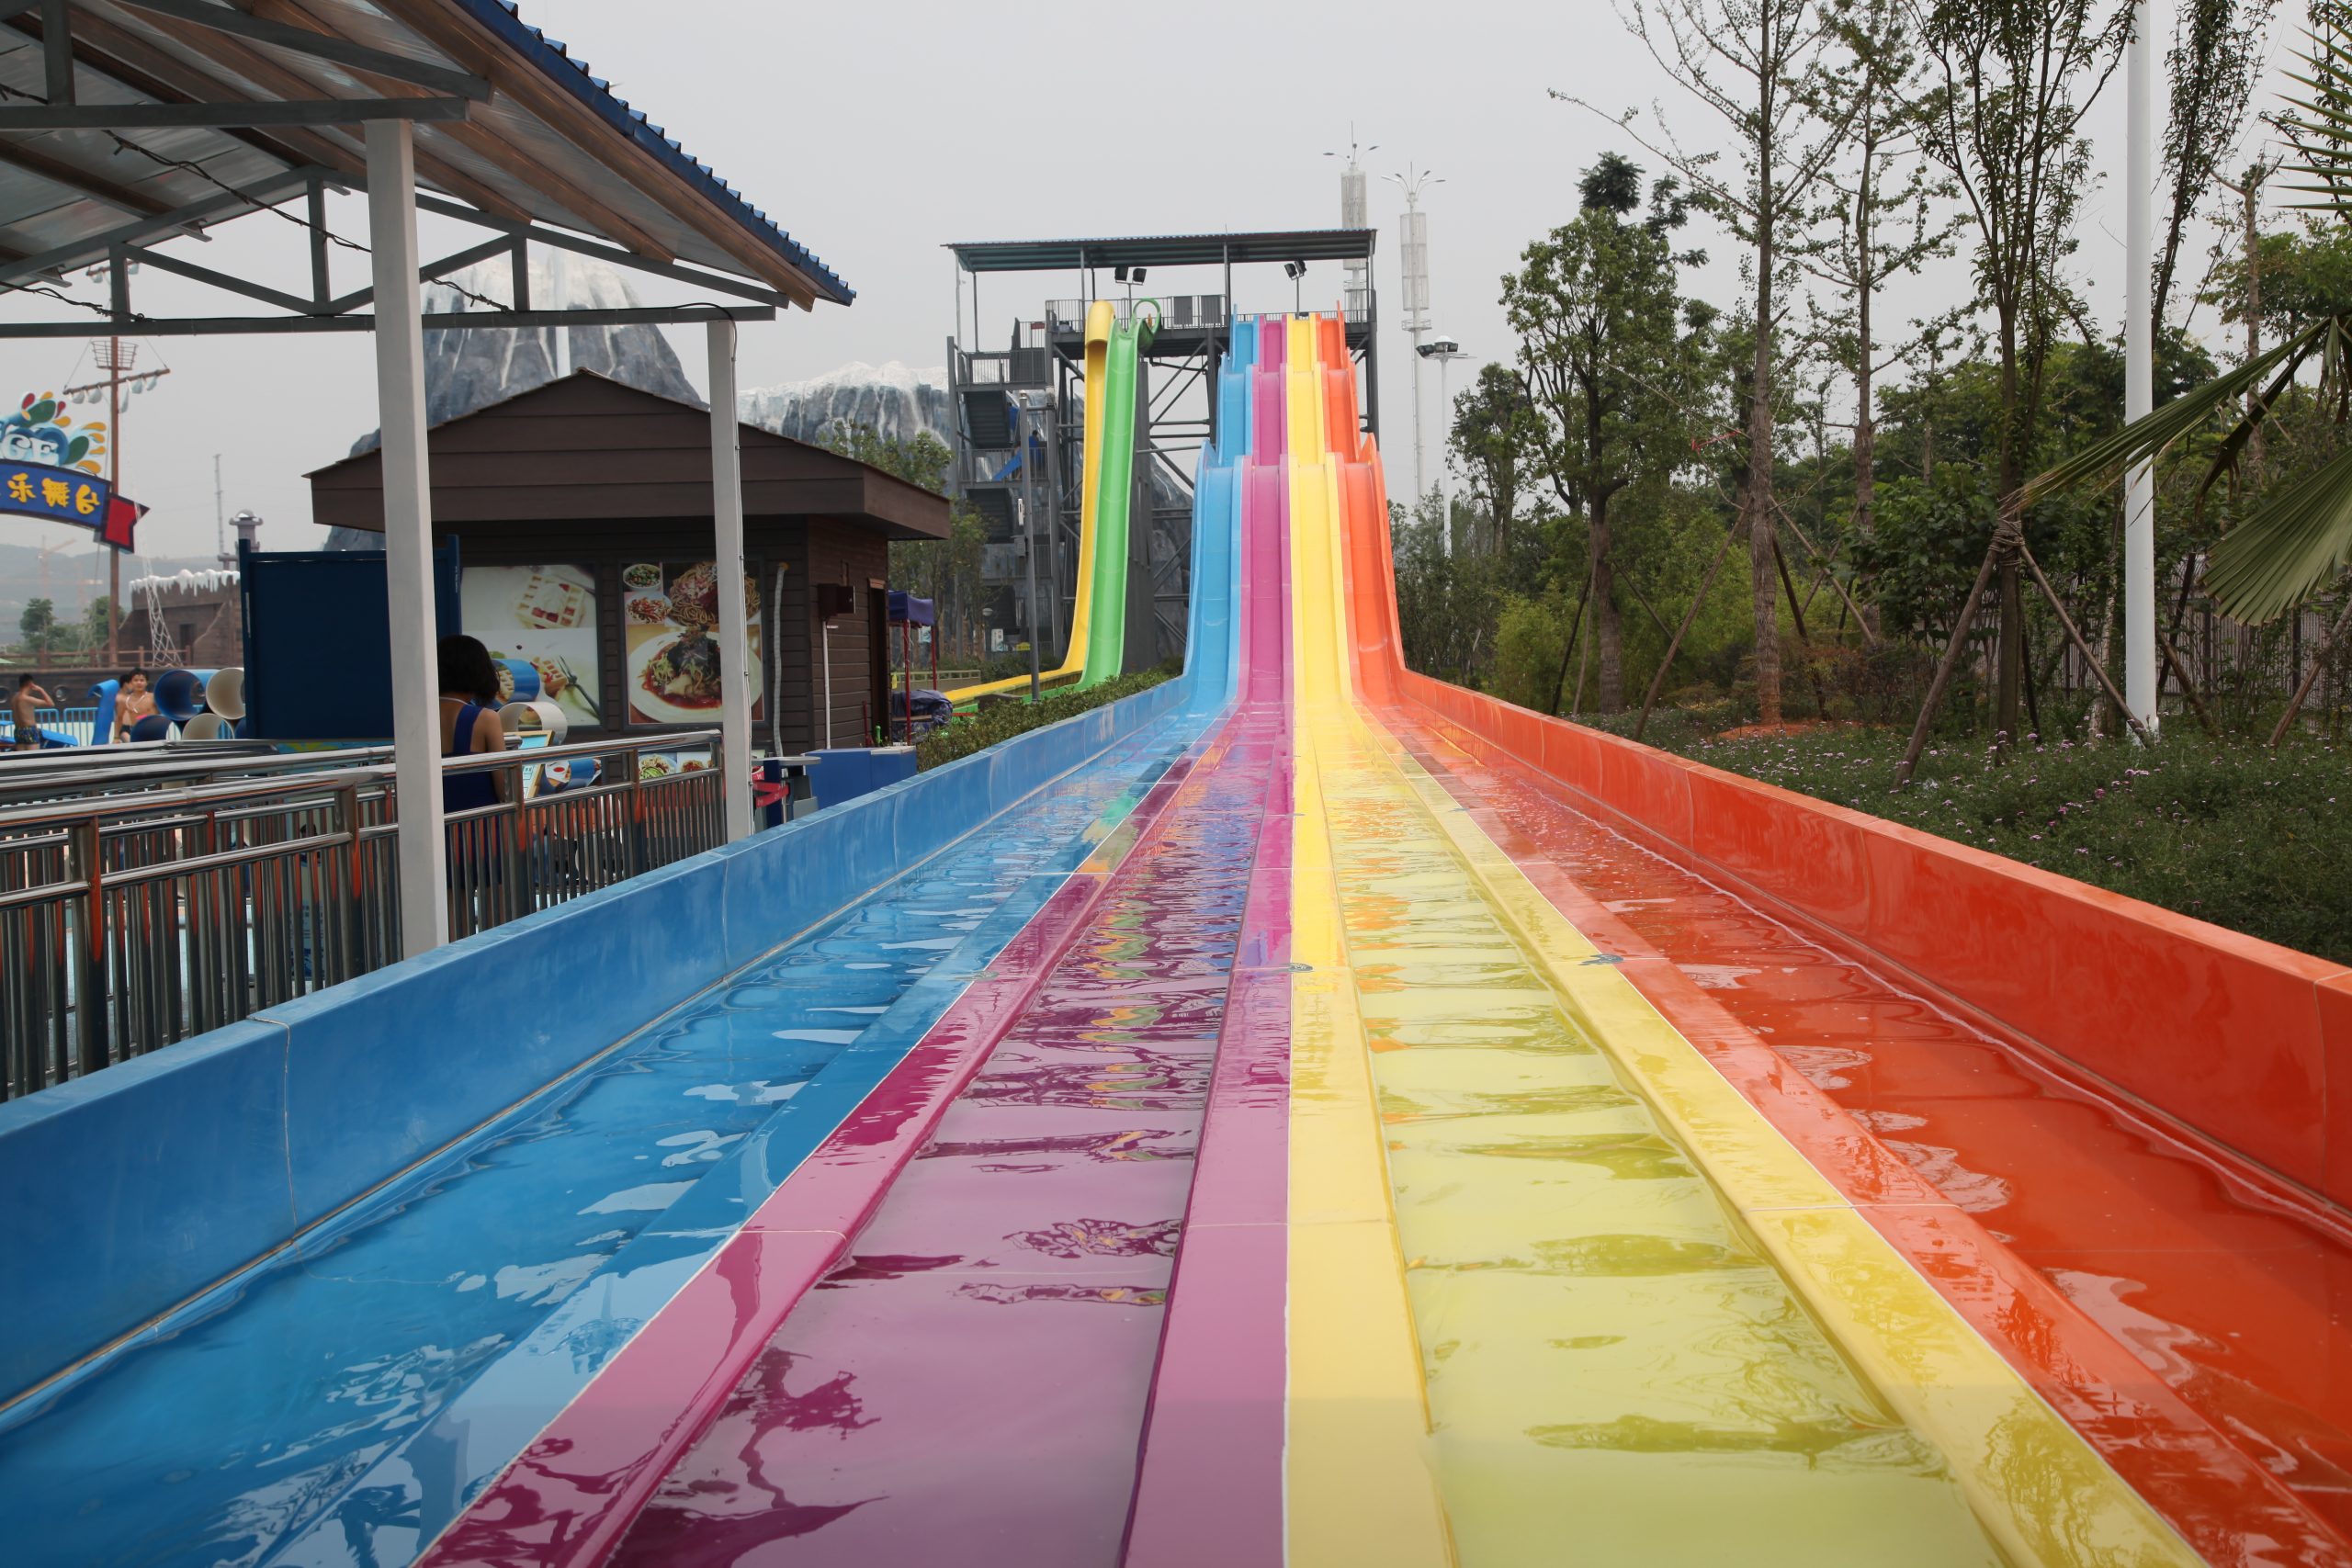 Why is a water slide the most popular among all water rides?